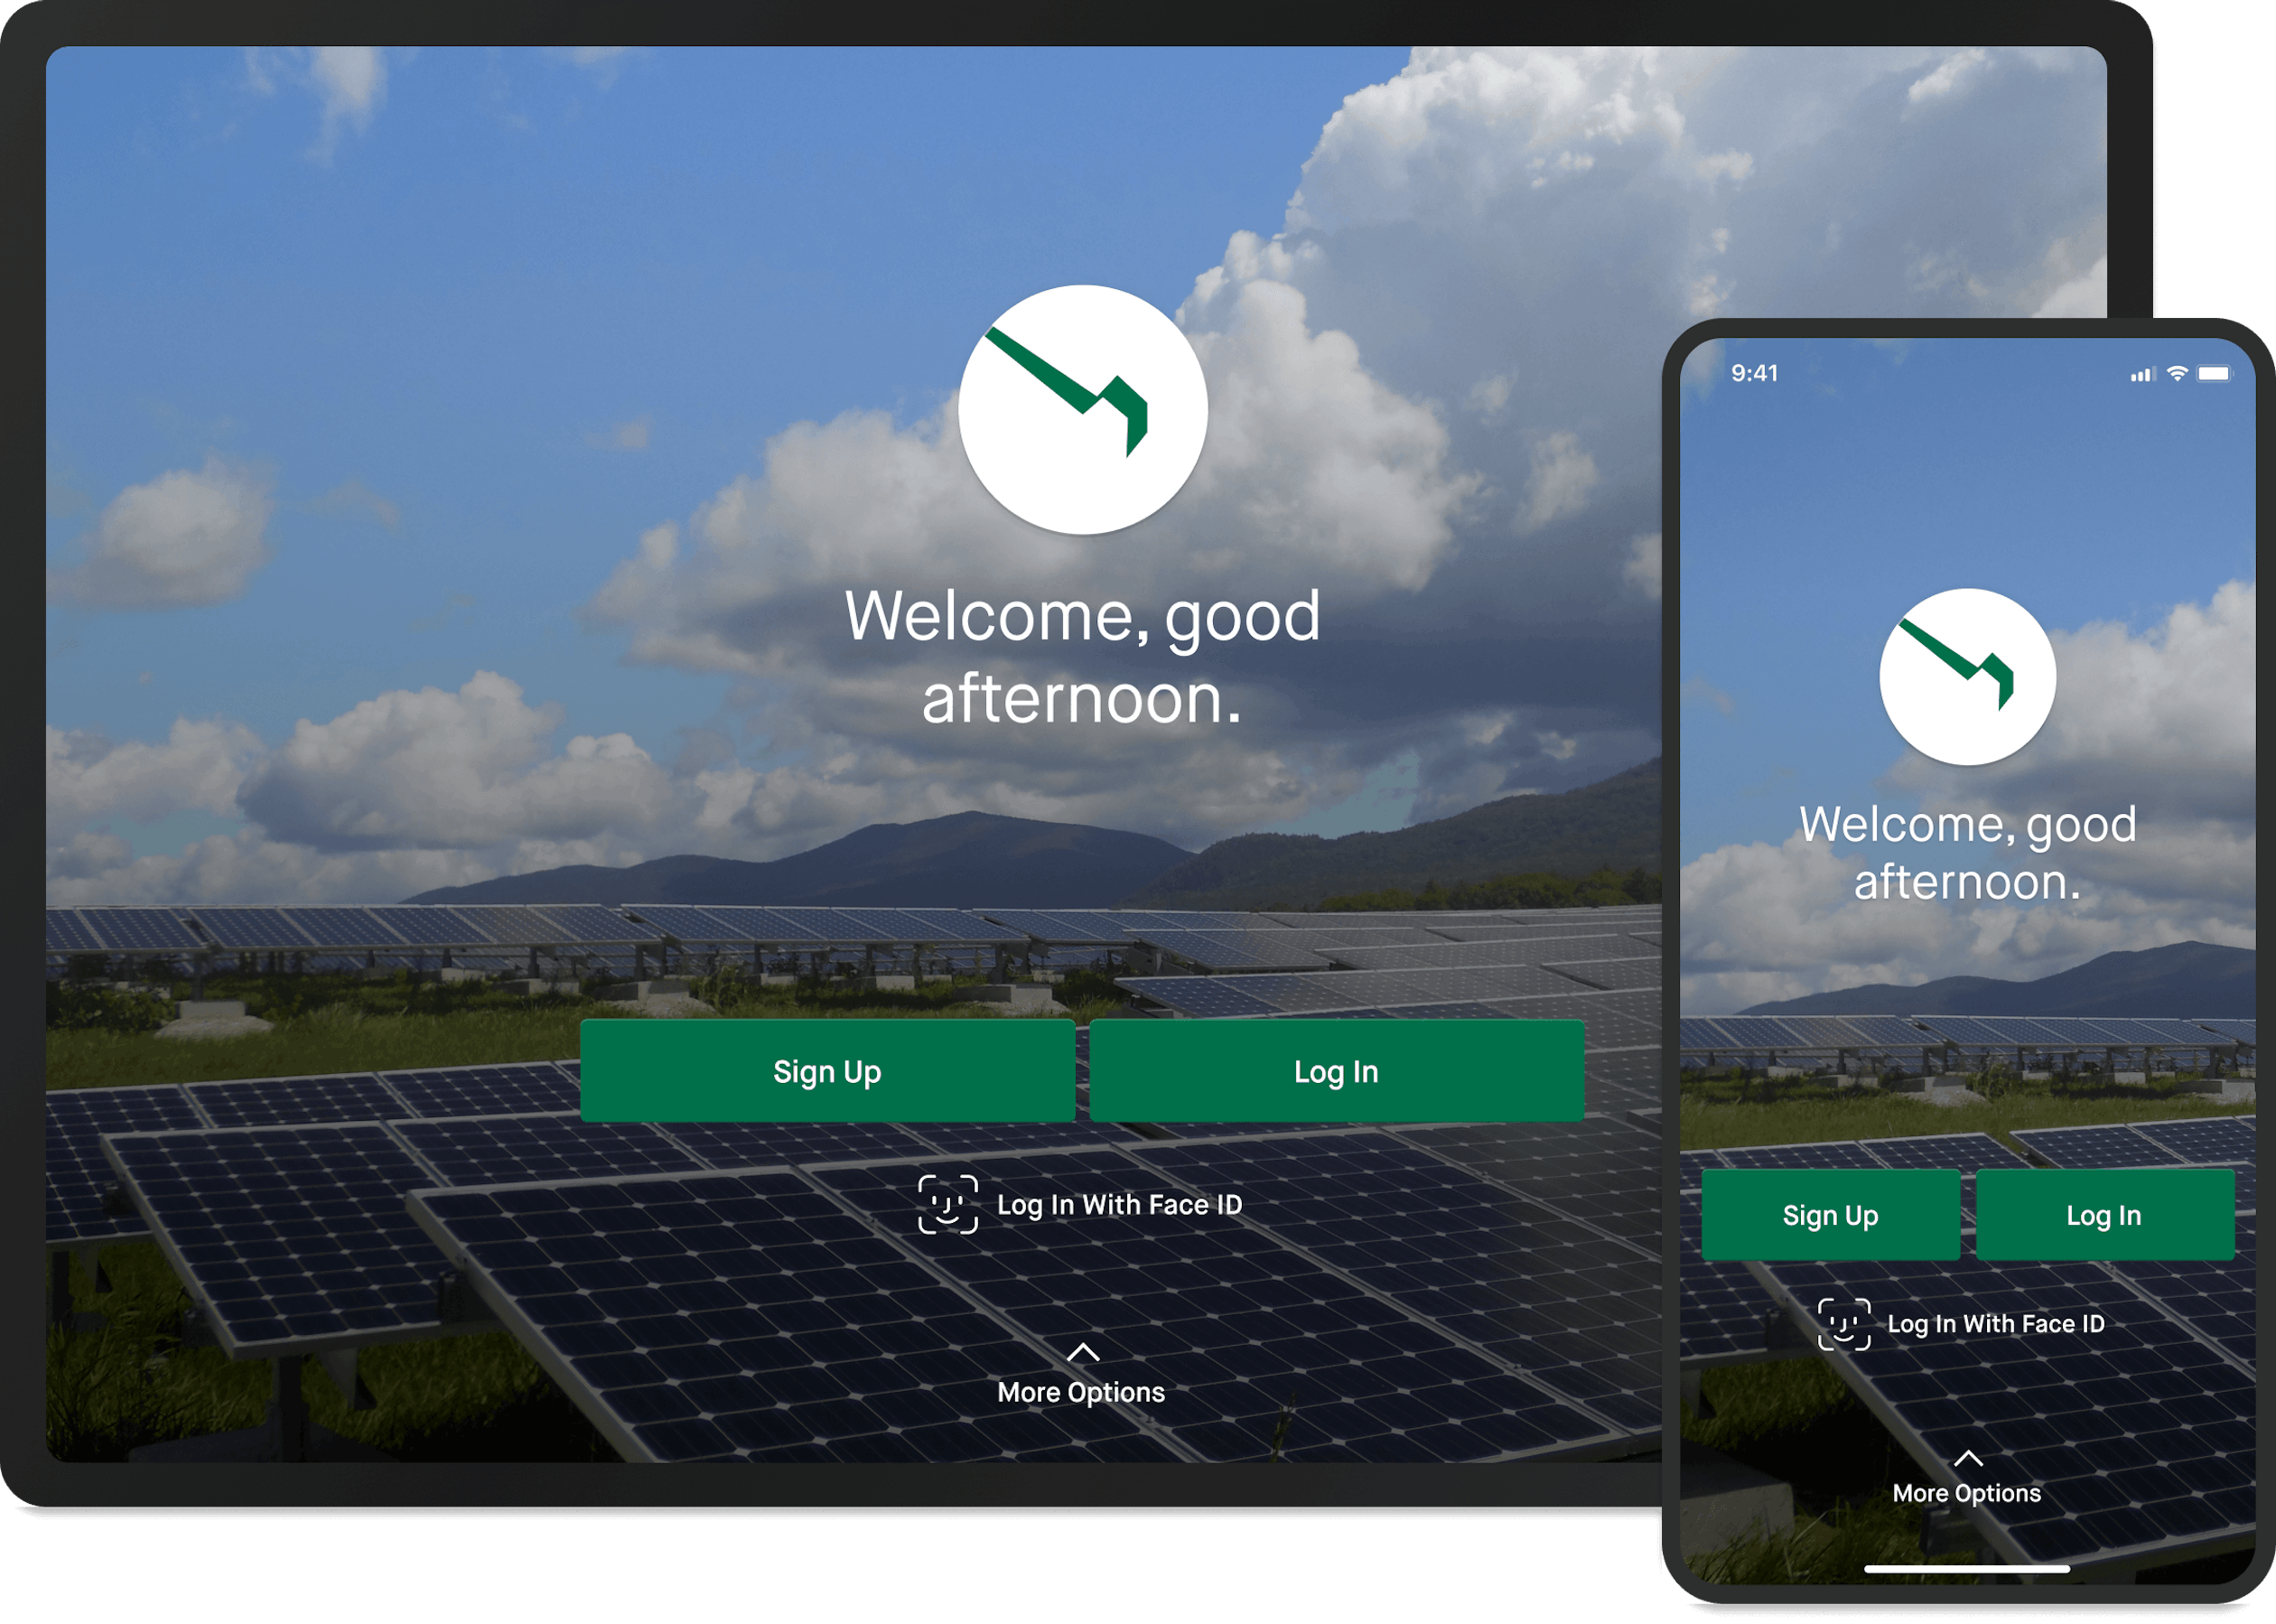 A tablet and a phone with the Green Mountain Power app login page showing, which ahs an image of solar panels in a field in front of mountains with a partially cloudy sky. The words Welcome, good afternoon, show below the GMP logo. There is also a sign-up button and a log-in button.